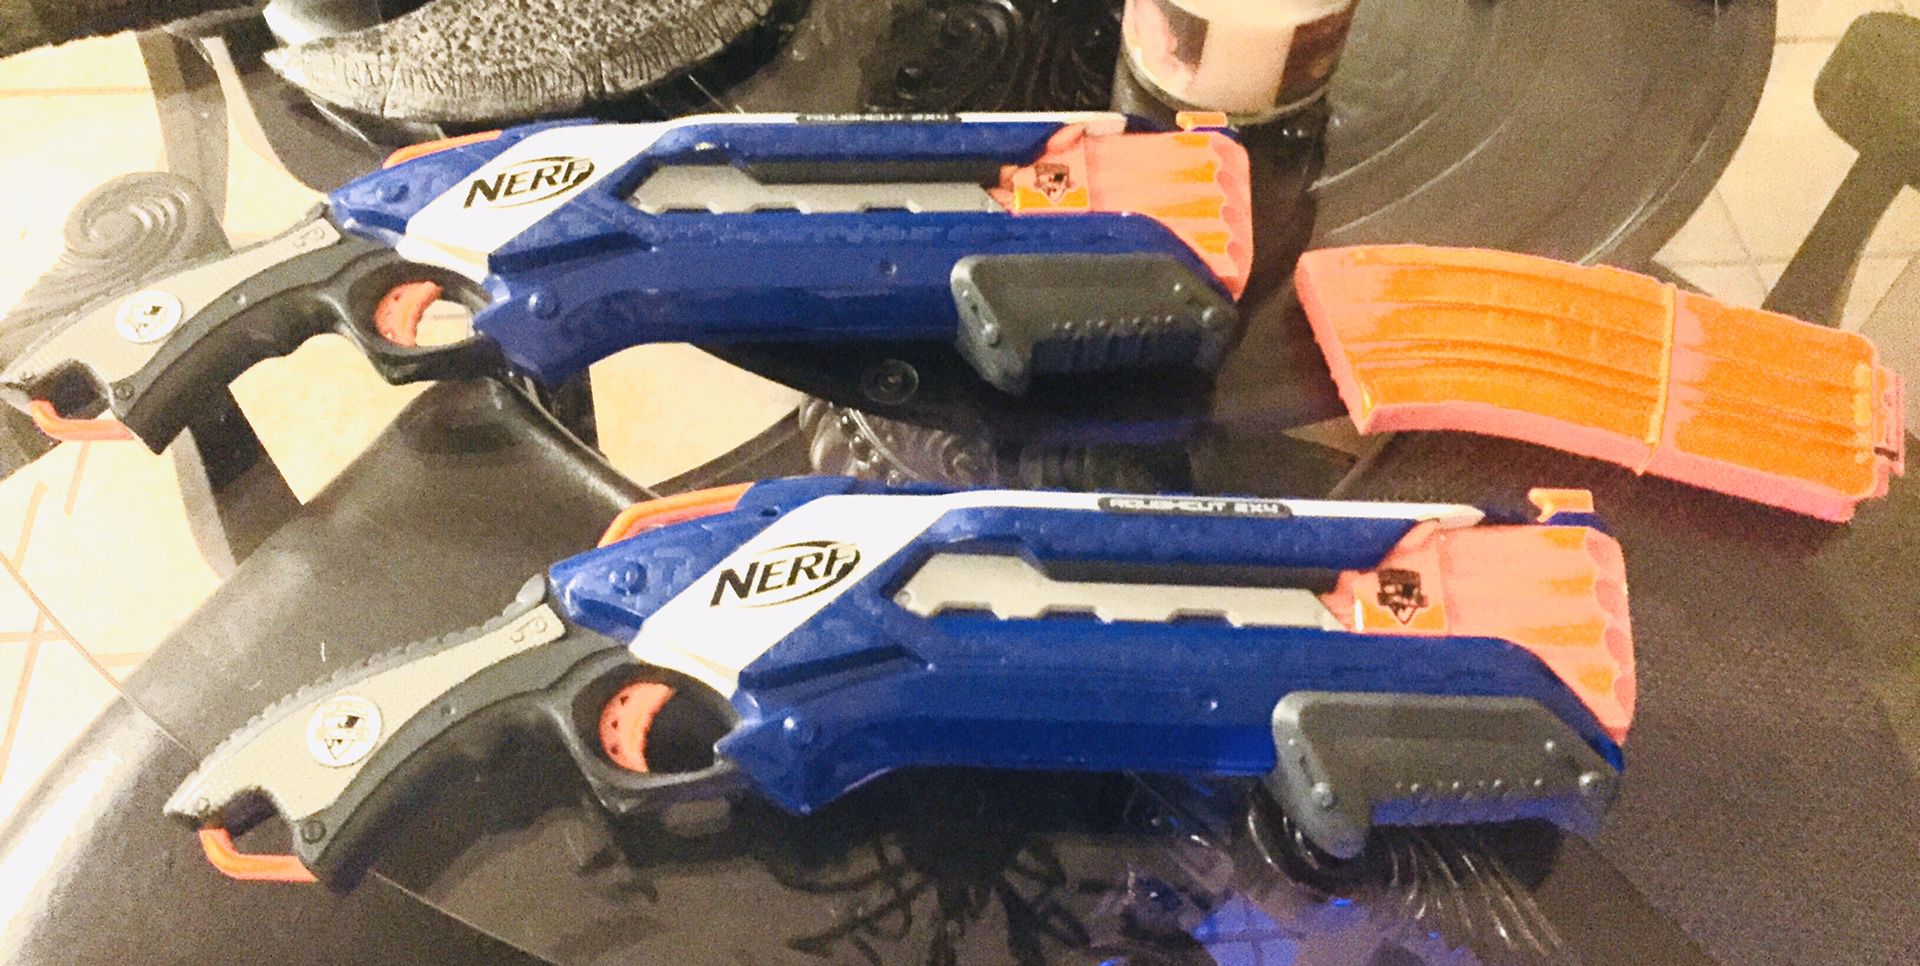 Rough-cut Nerf guns two of them plus an extra bullet pack